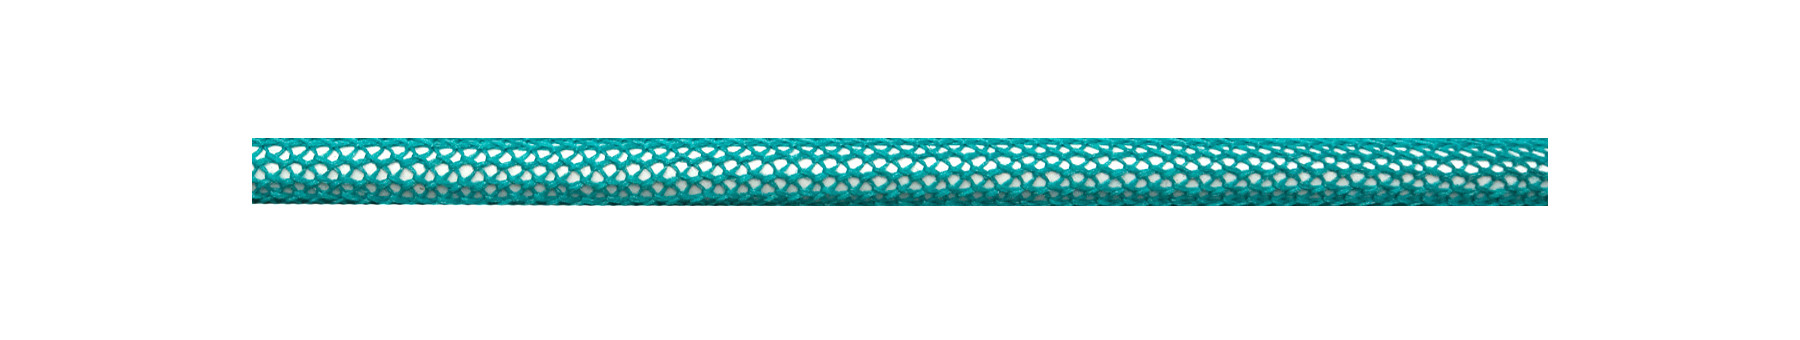 Textile Cable Turquoise Netlike Textile Covering